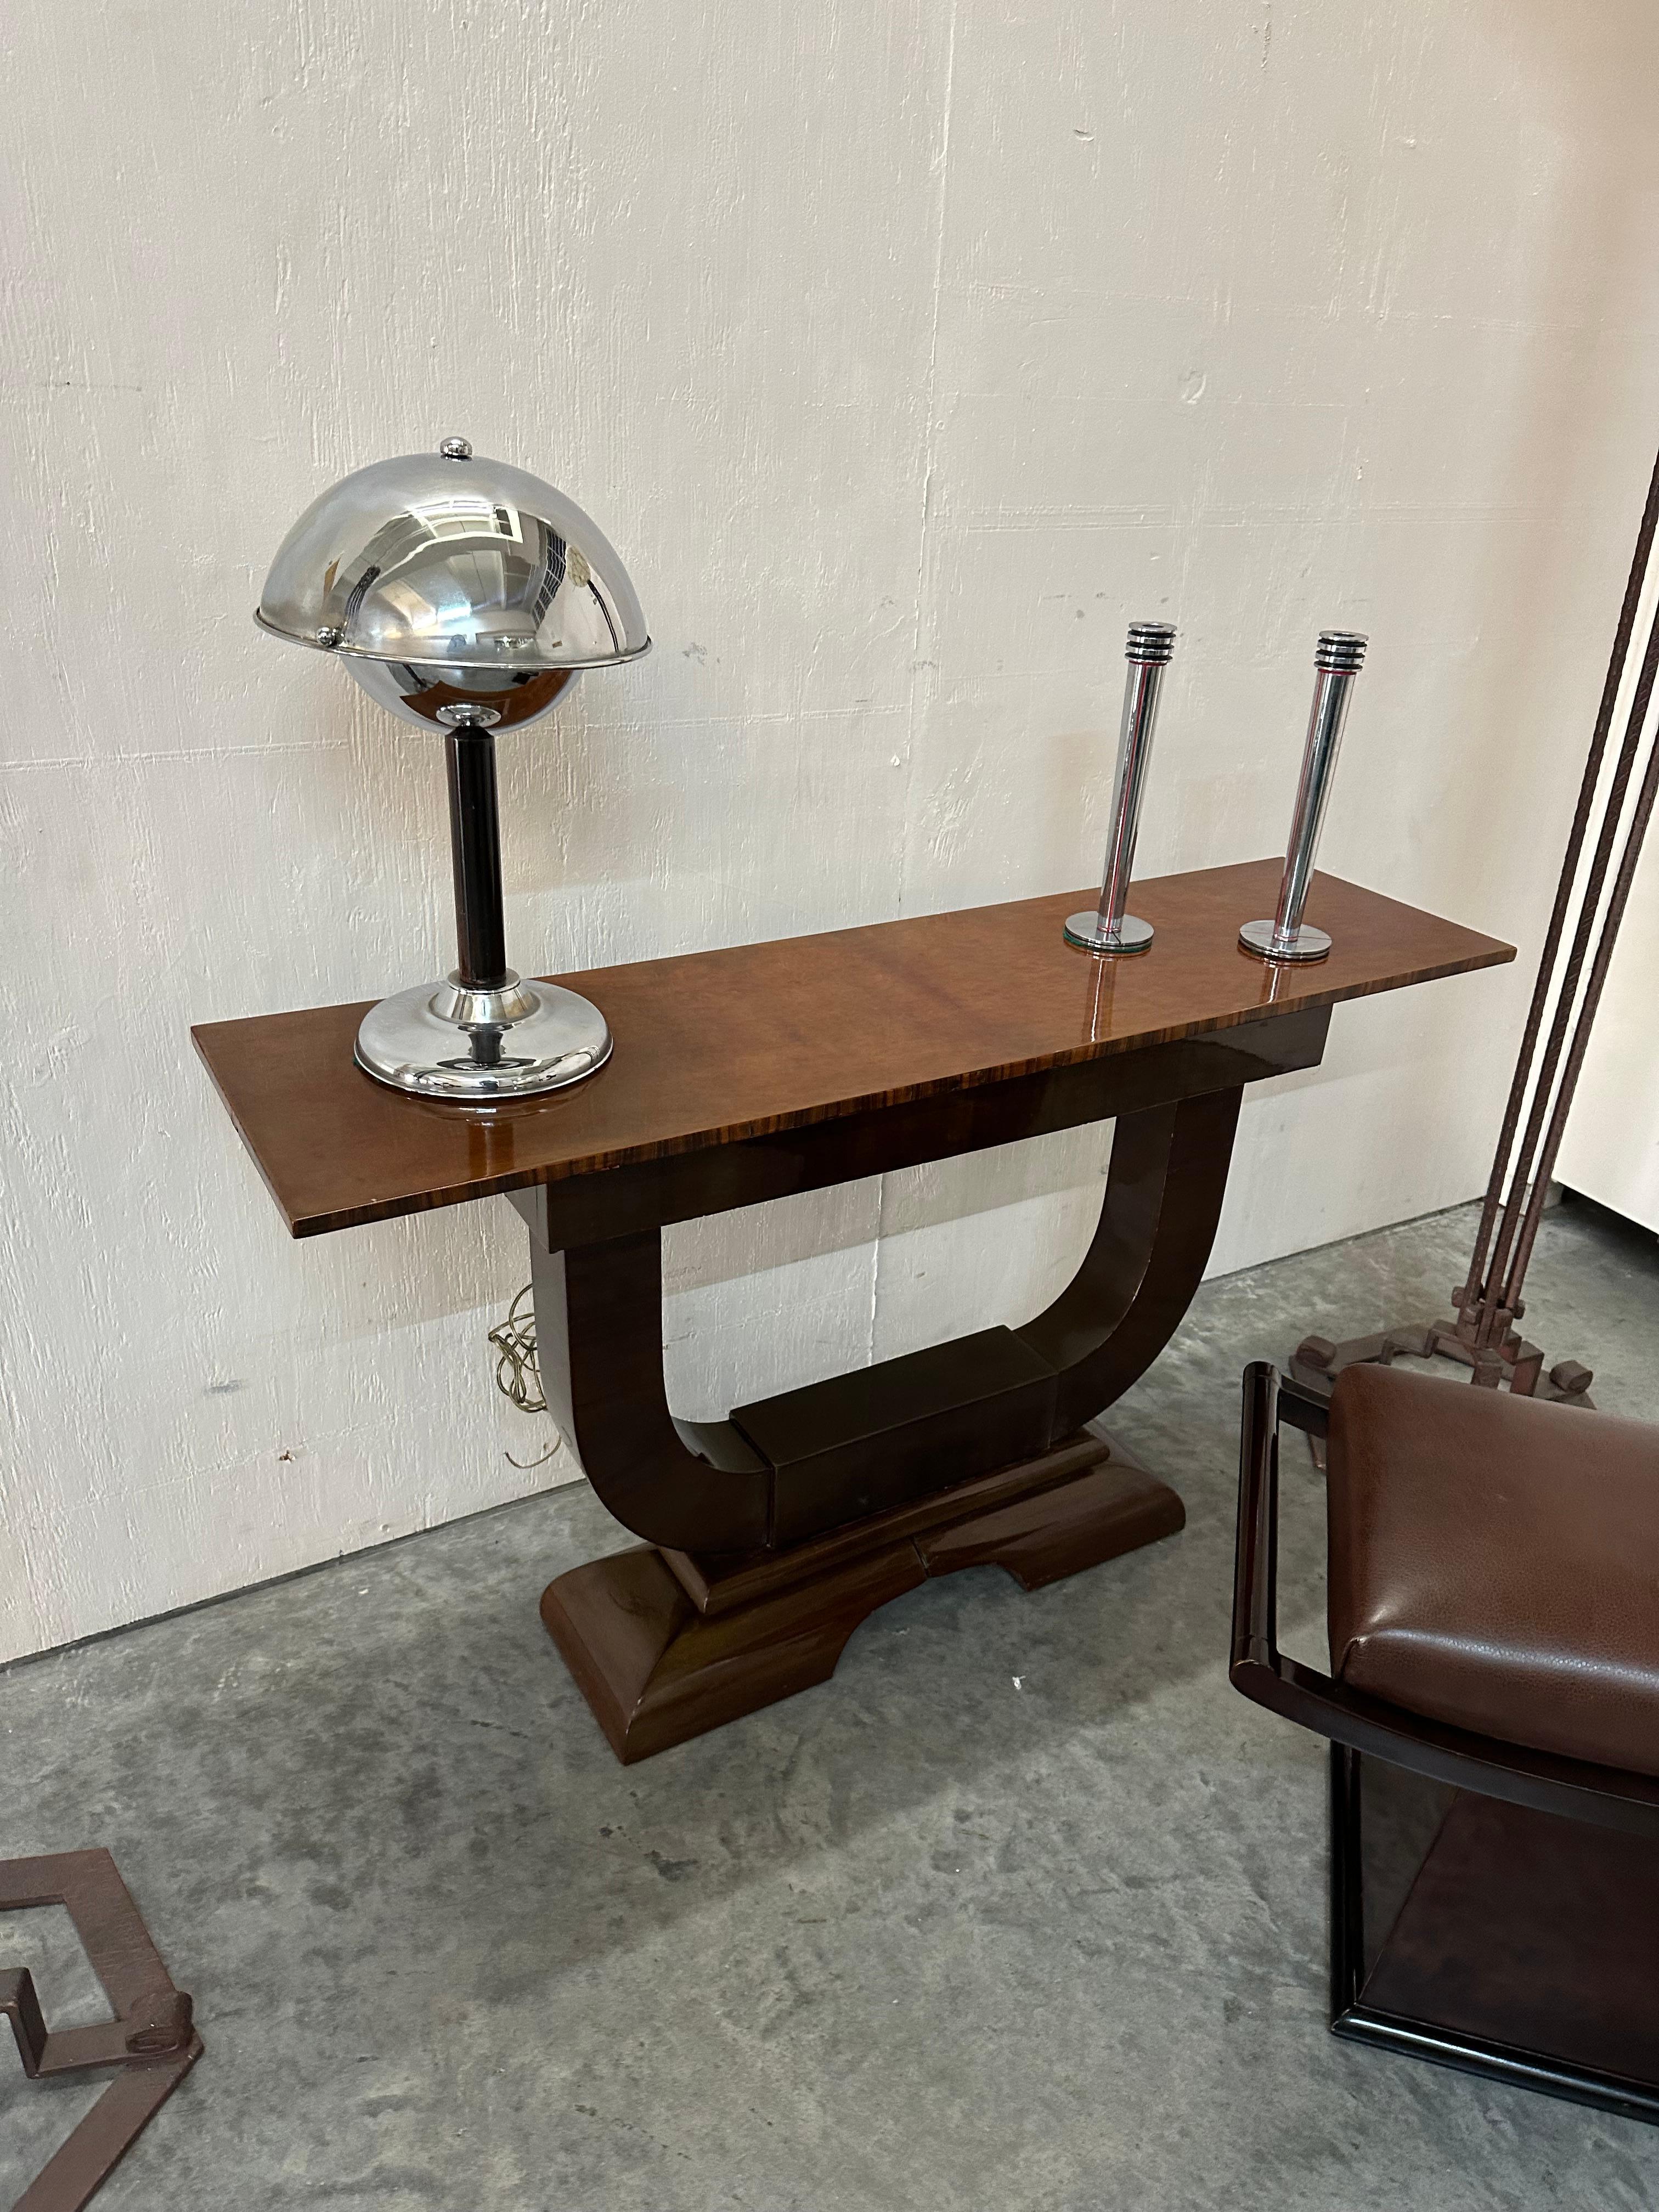 Art Deco Table Lamp in Chrome and Wood, France, 1930 For Sale 2